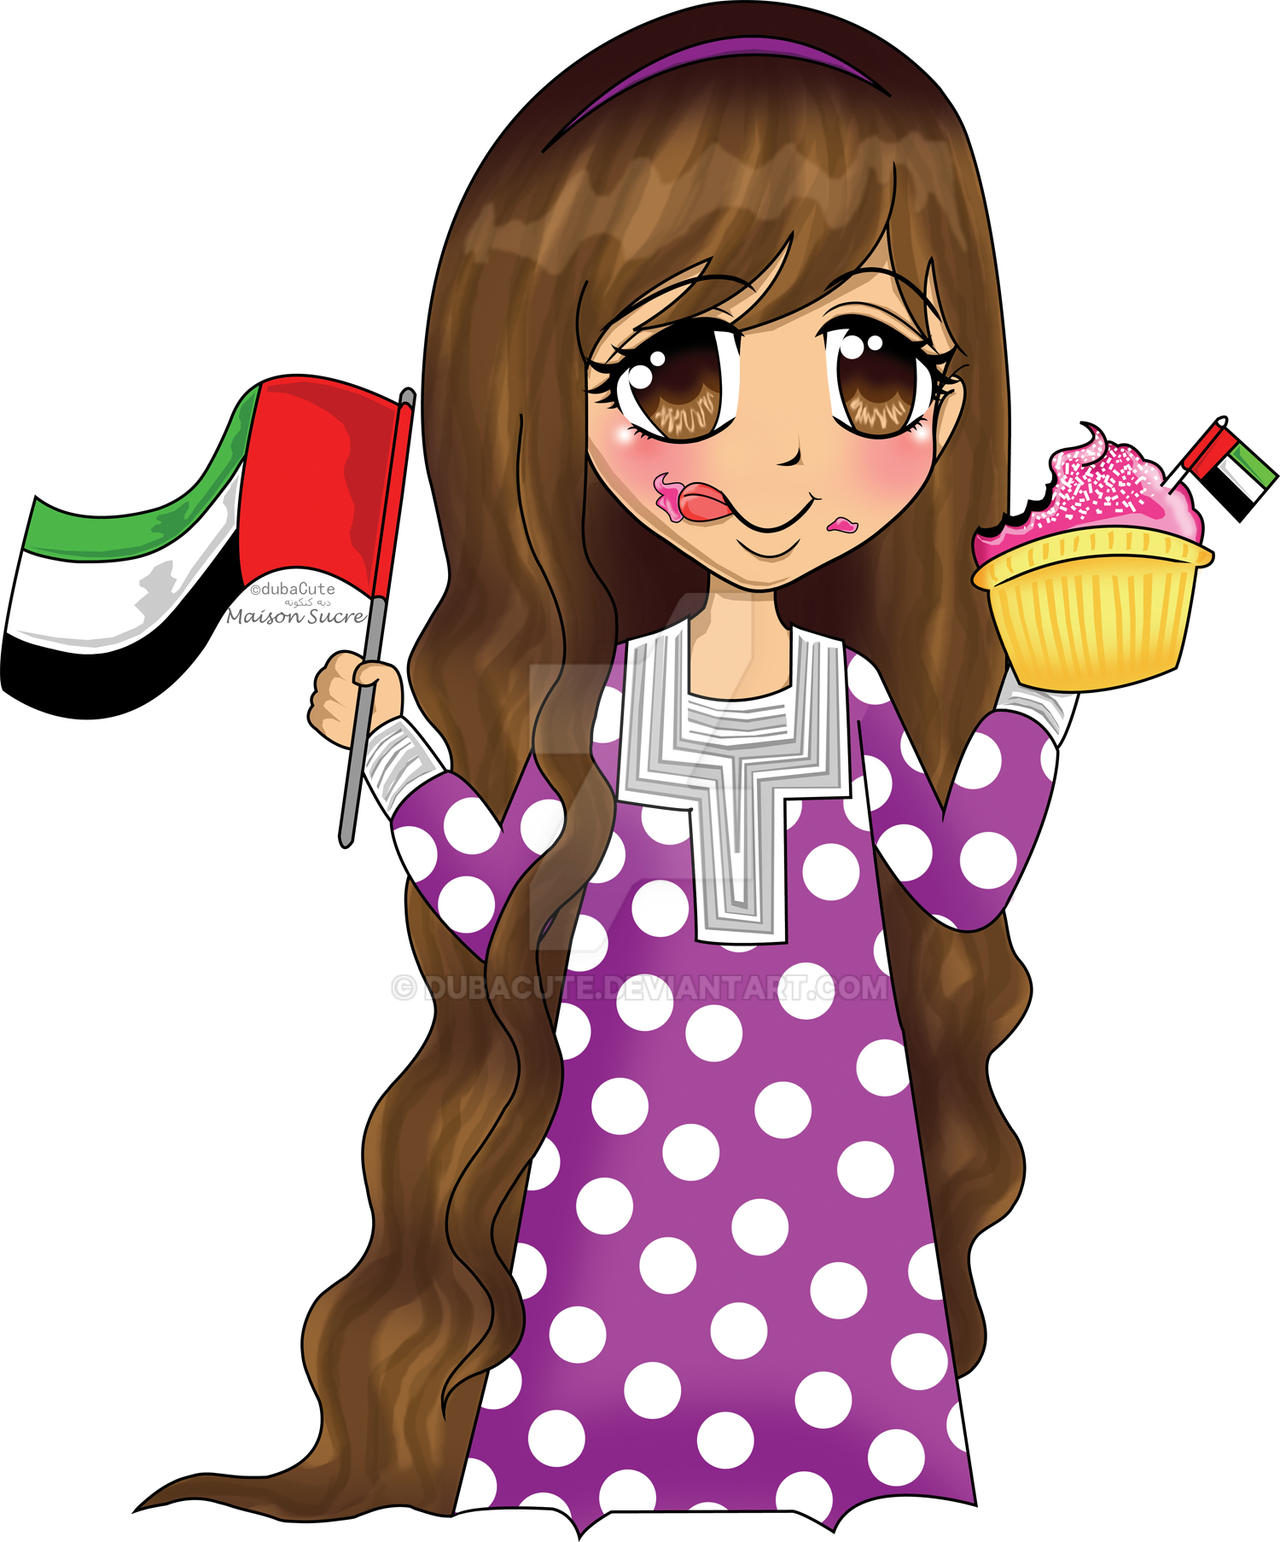 Happy National Day UAE by dubaCute on DeviantArt